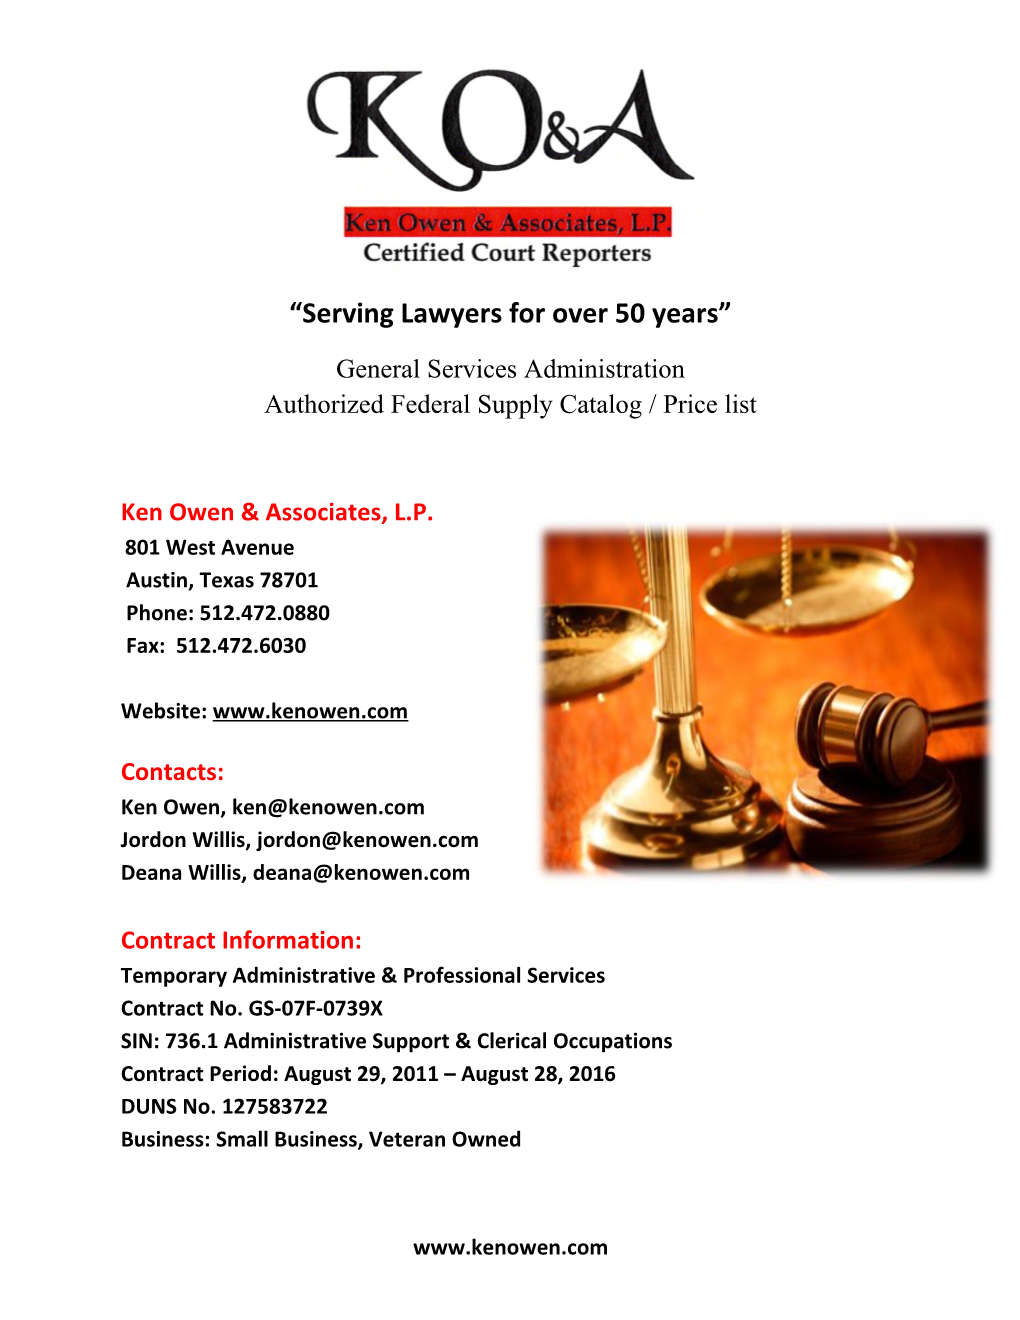 Serving Lawyers for Over 50 Years